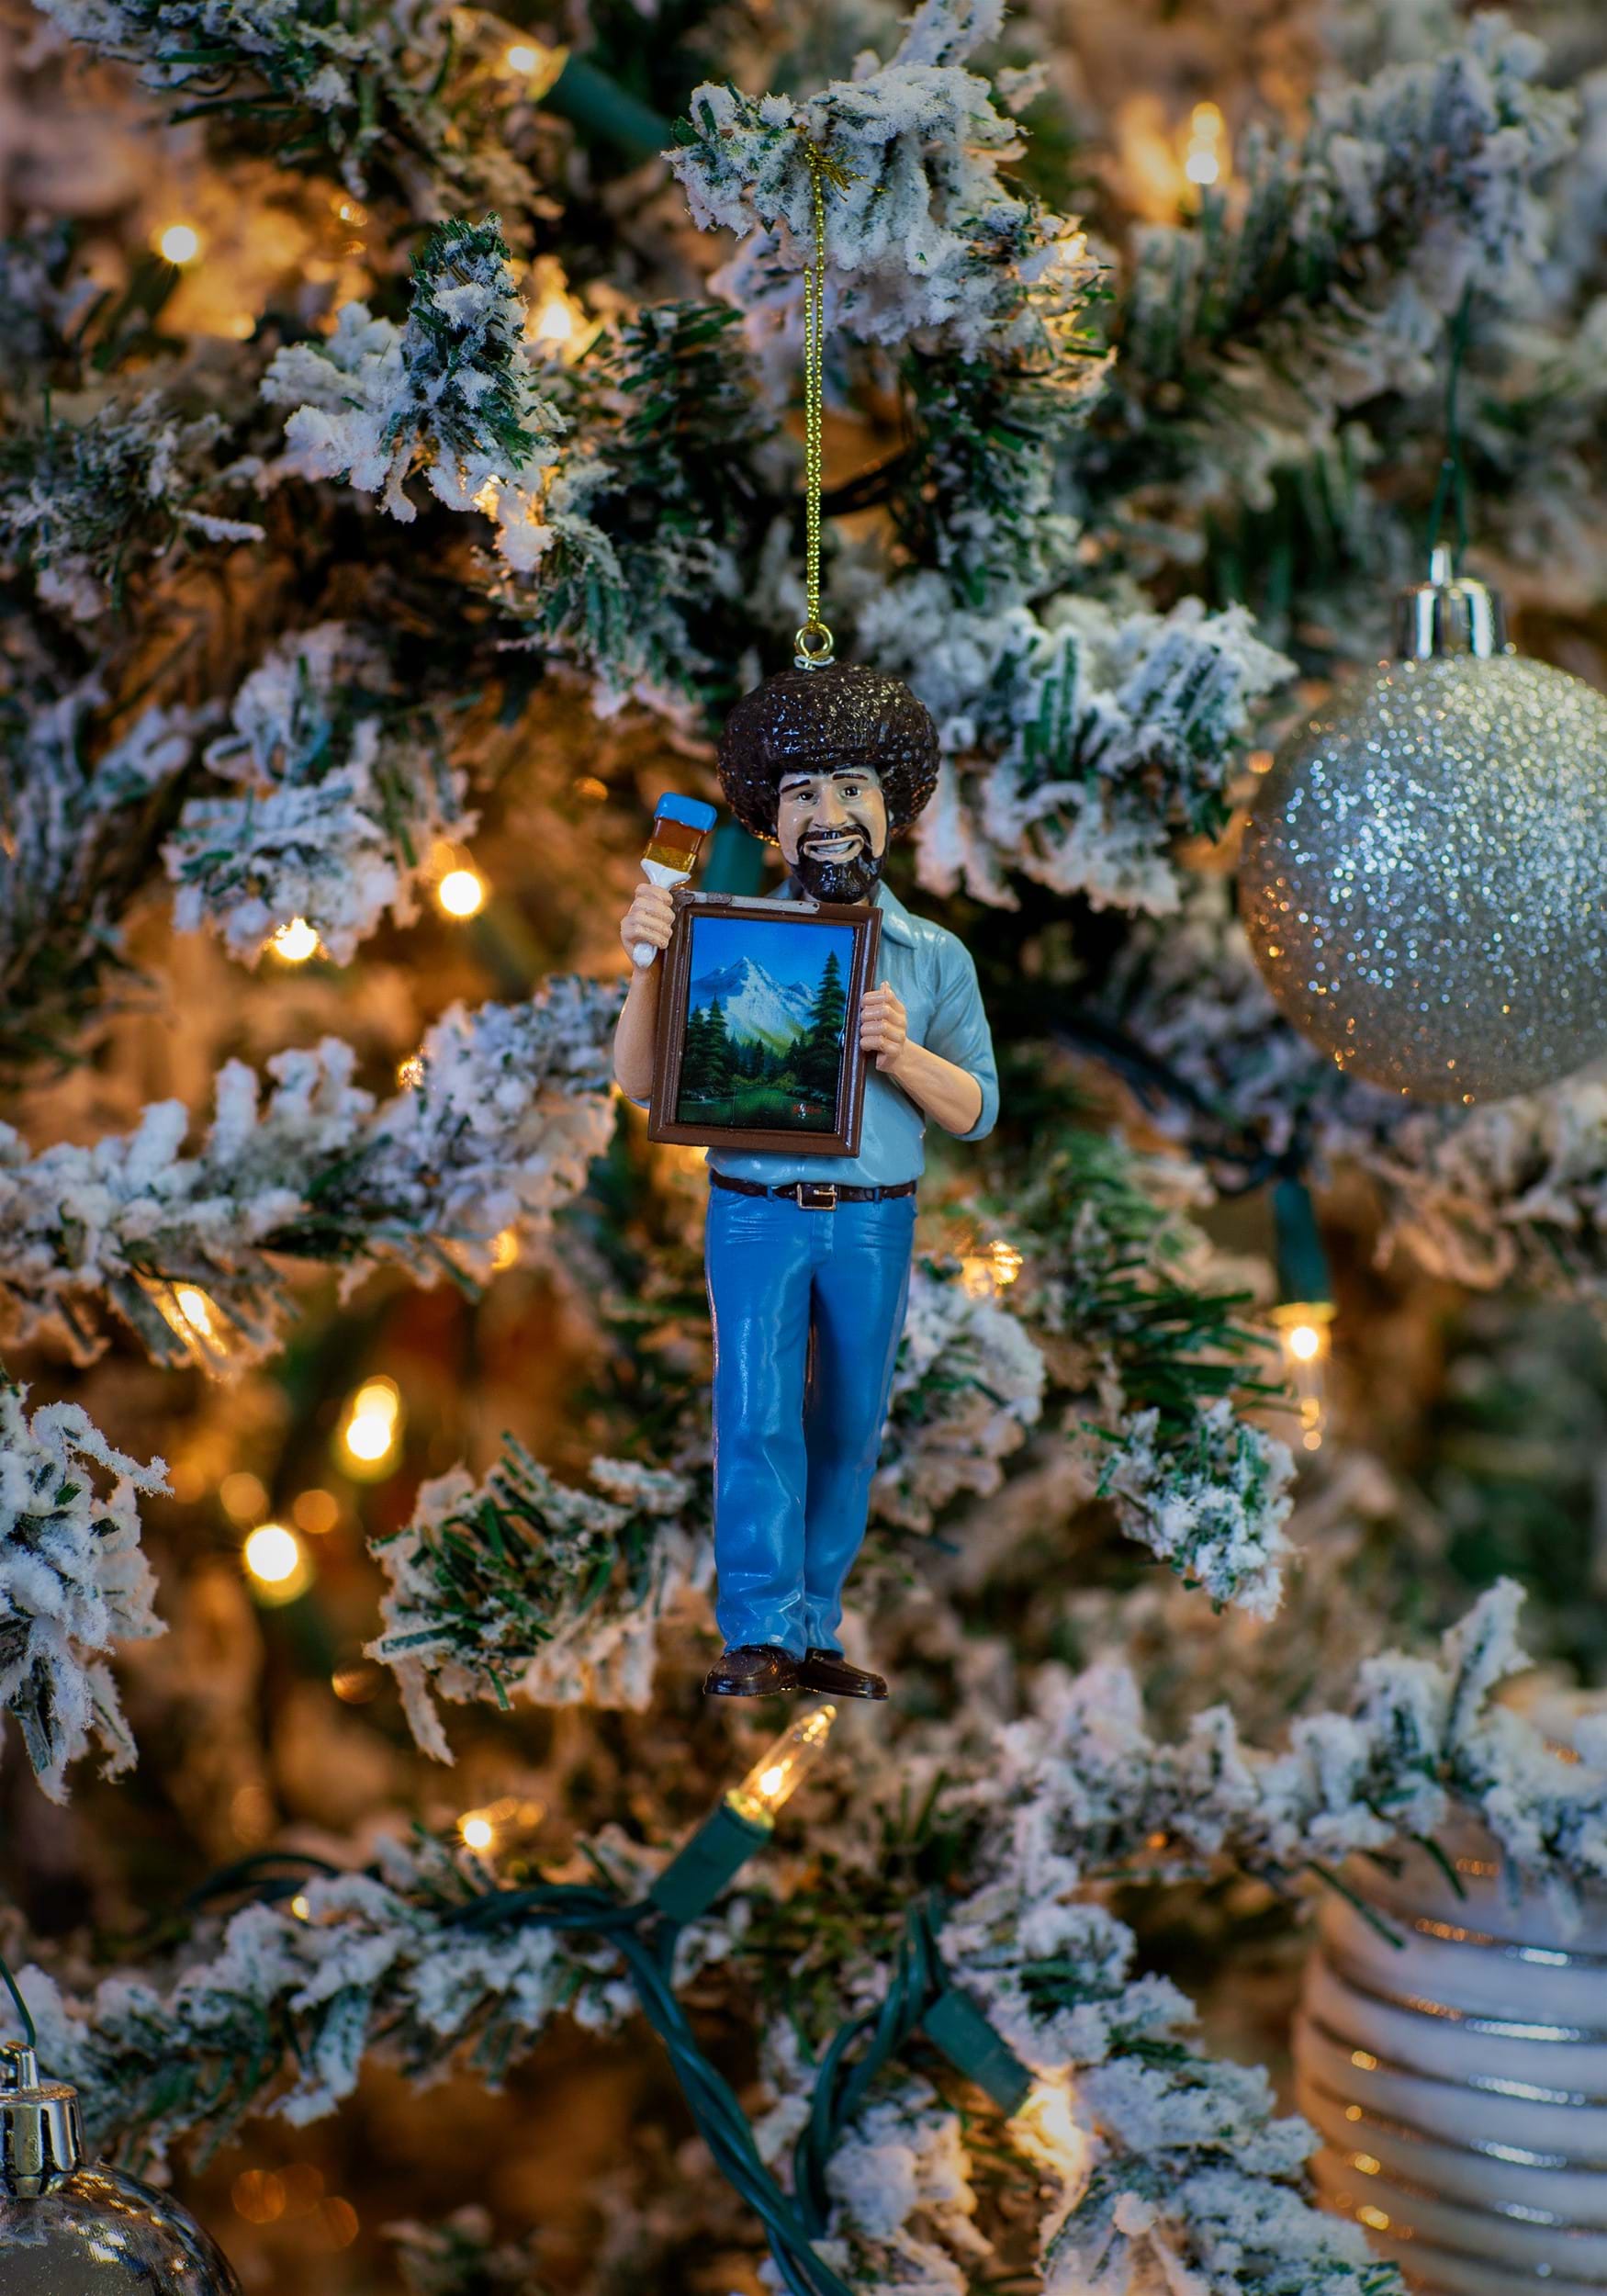 5-Inch Bob Ross with Frame Painting Tree Ornament | Christmas Ornaments